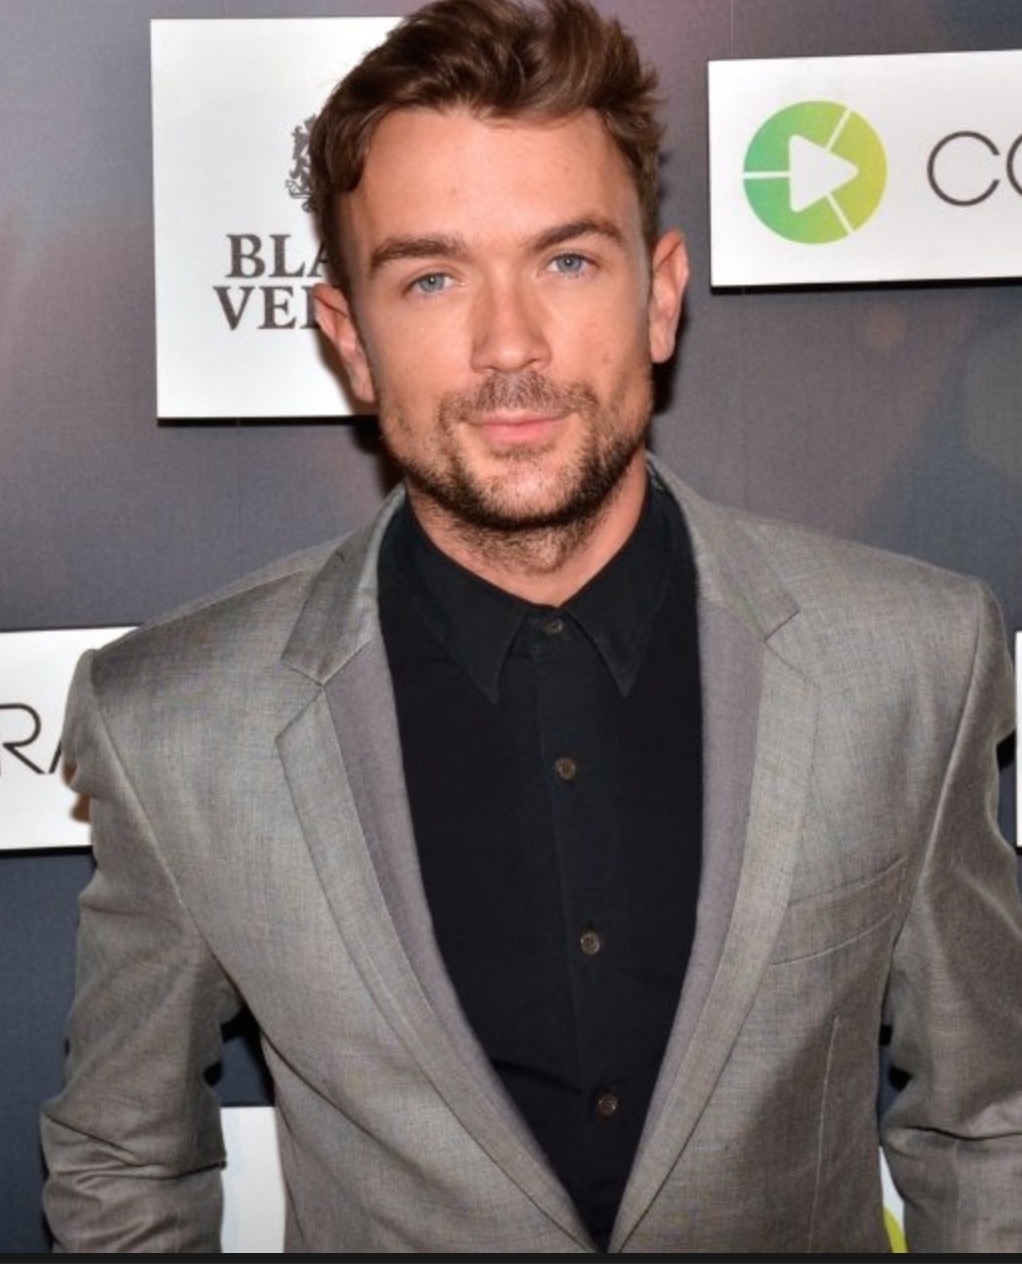 Emrhys Cooper attends the Colaborator.com Launch at Milk Studios on November 6, 2014 in Hollywood, California.